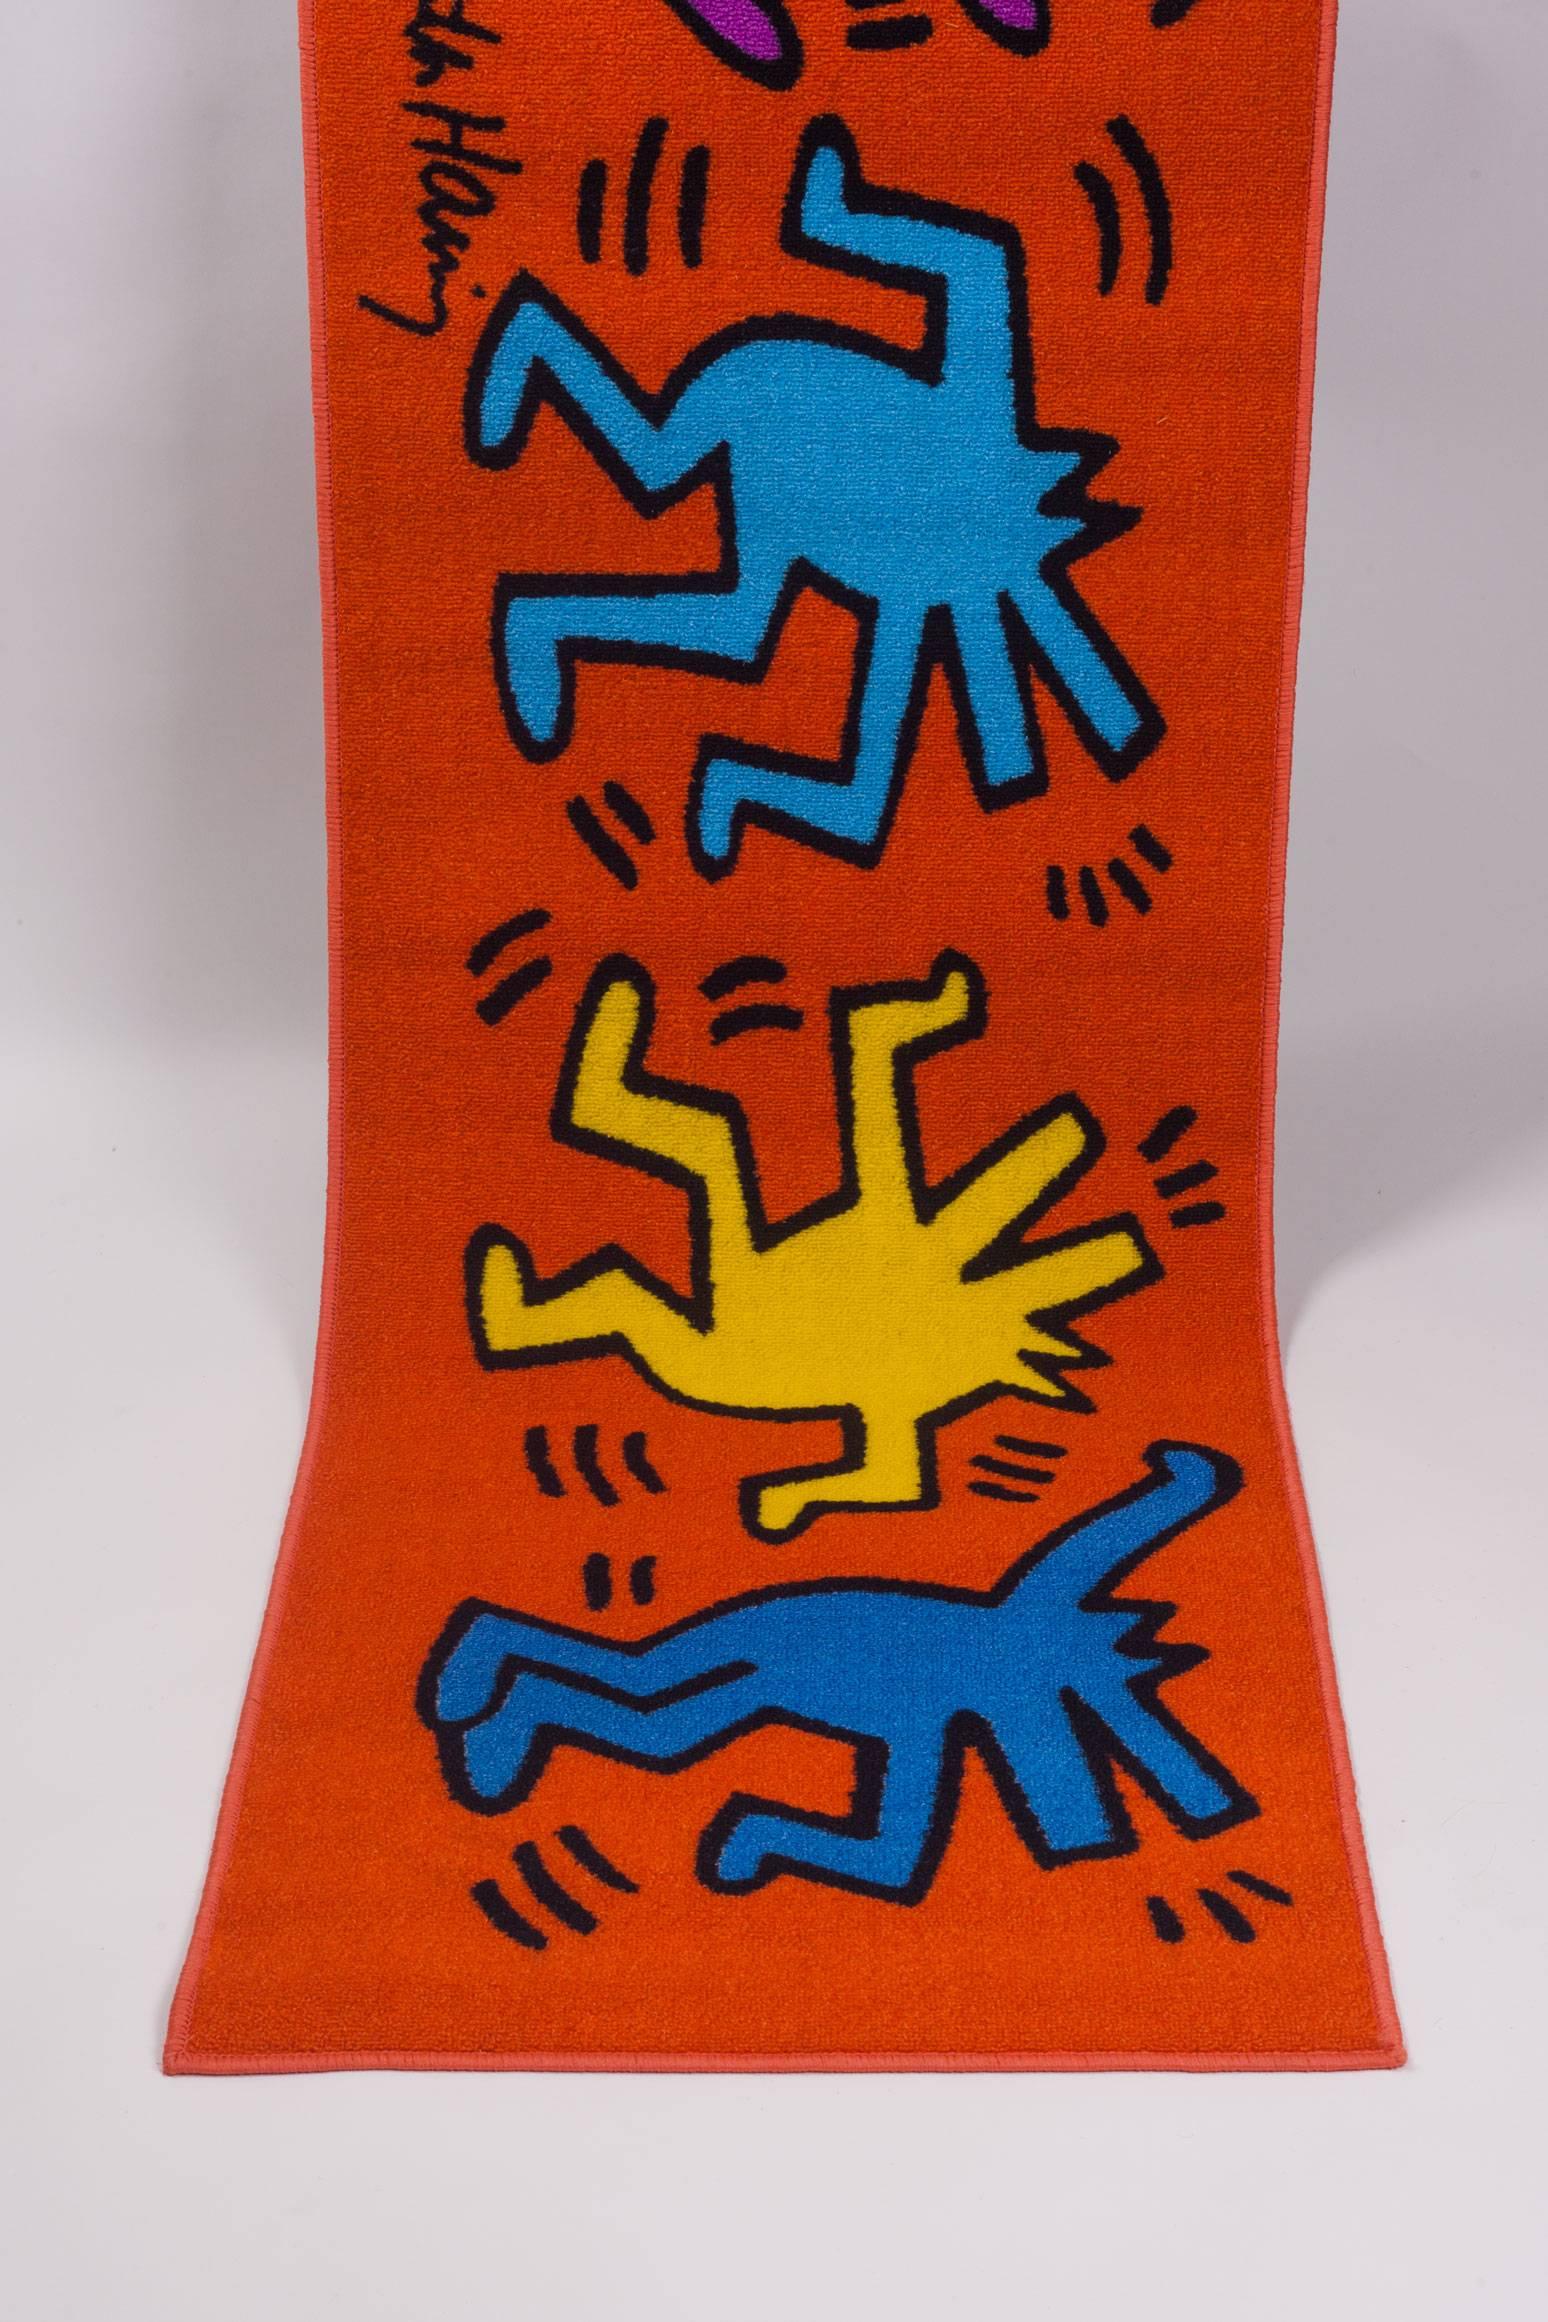 Contemporary Keith Haring Orange Runner rug with Dancing Figures in Blue Green Purple Yellow